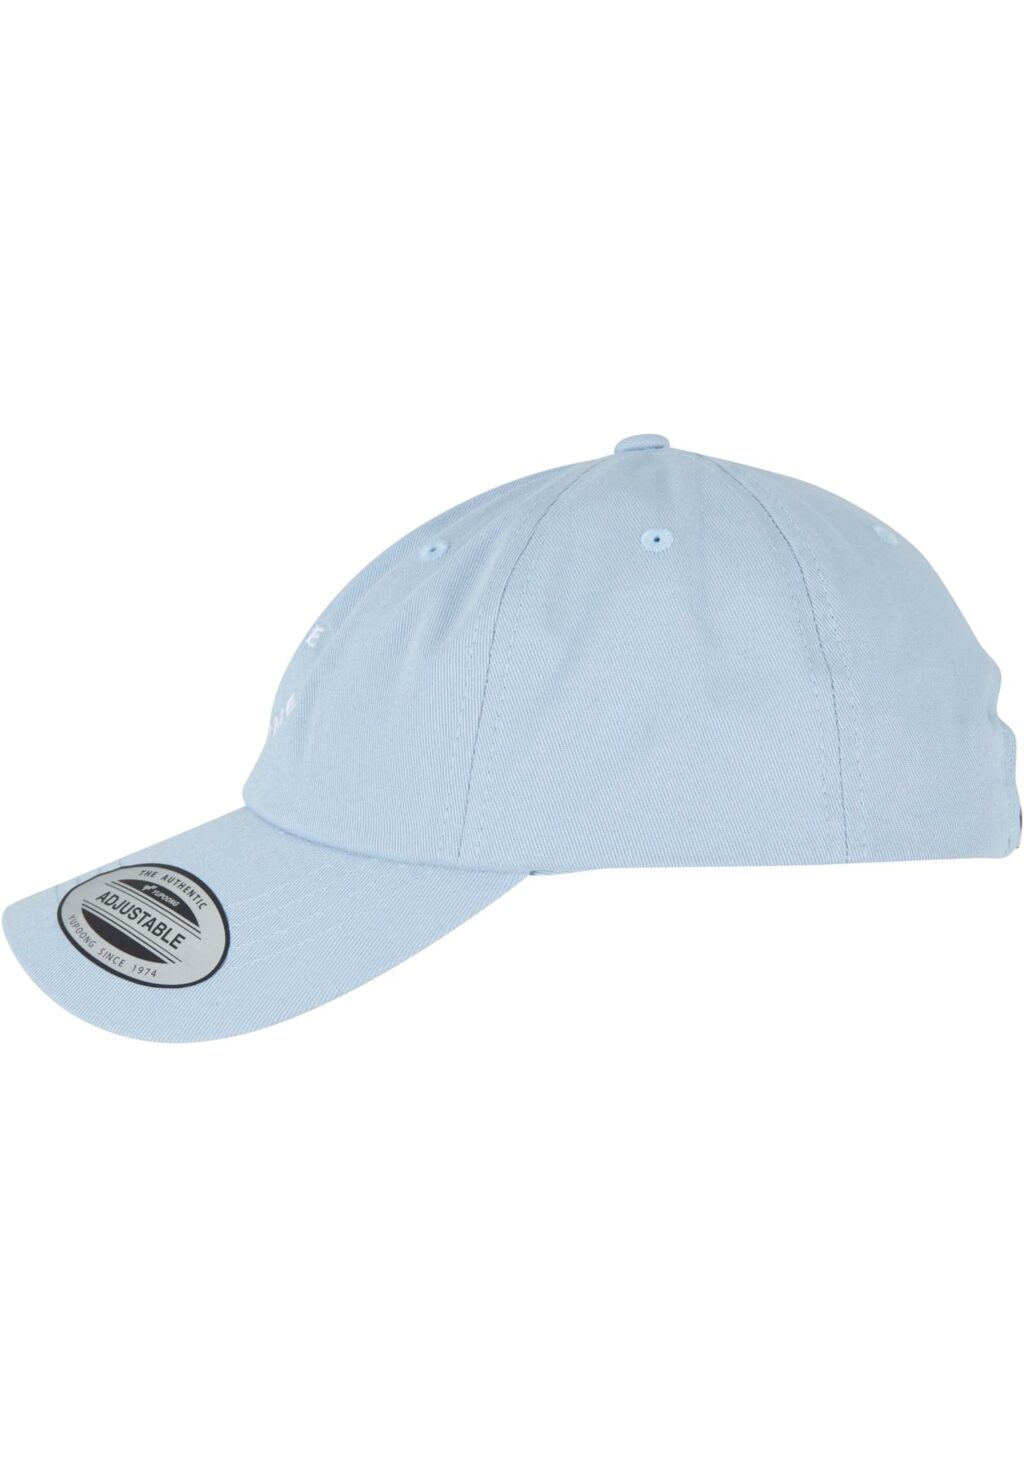 Be Awesome Cap lightblue one BE077